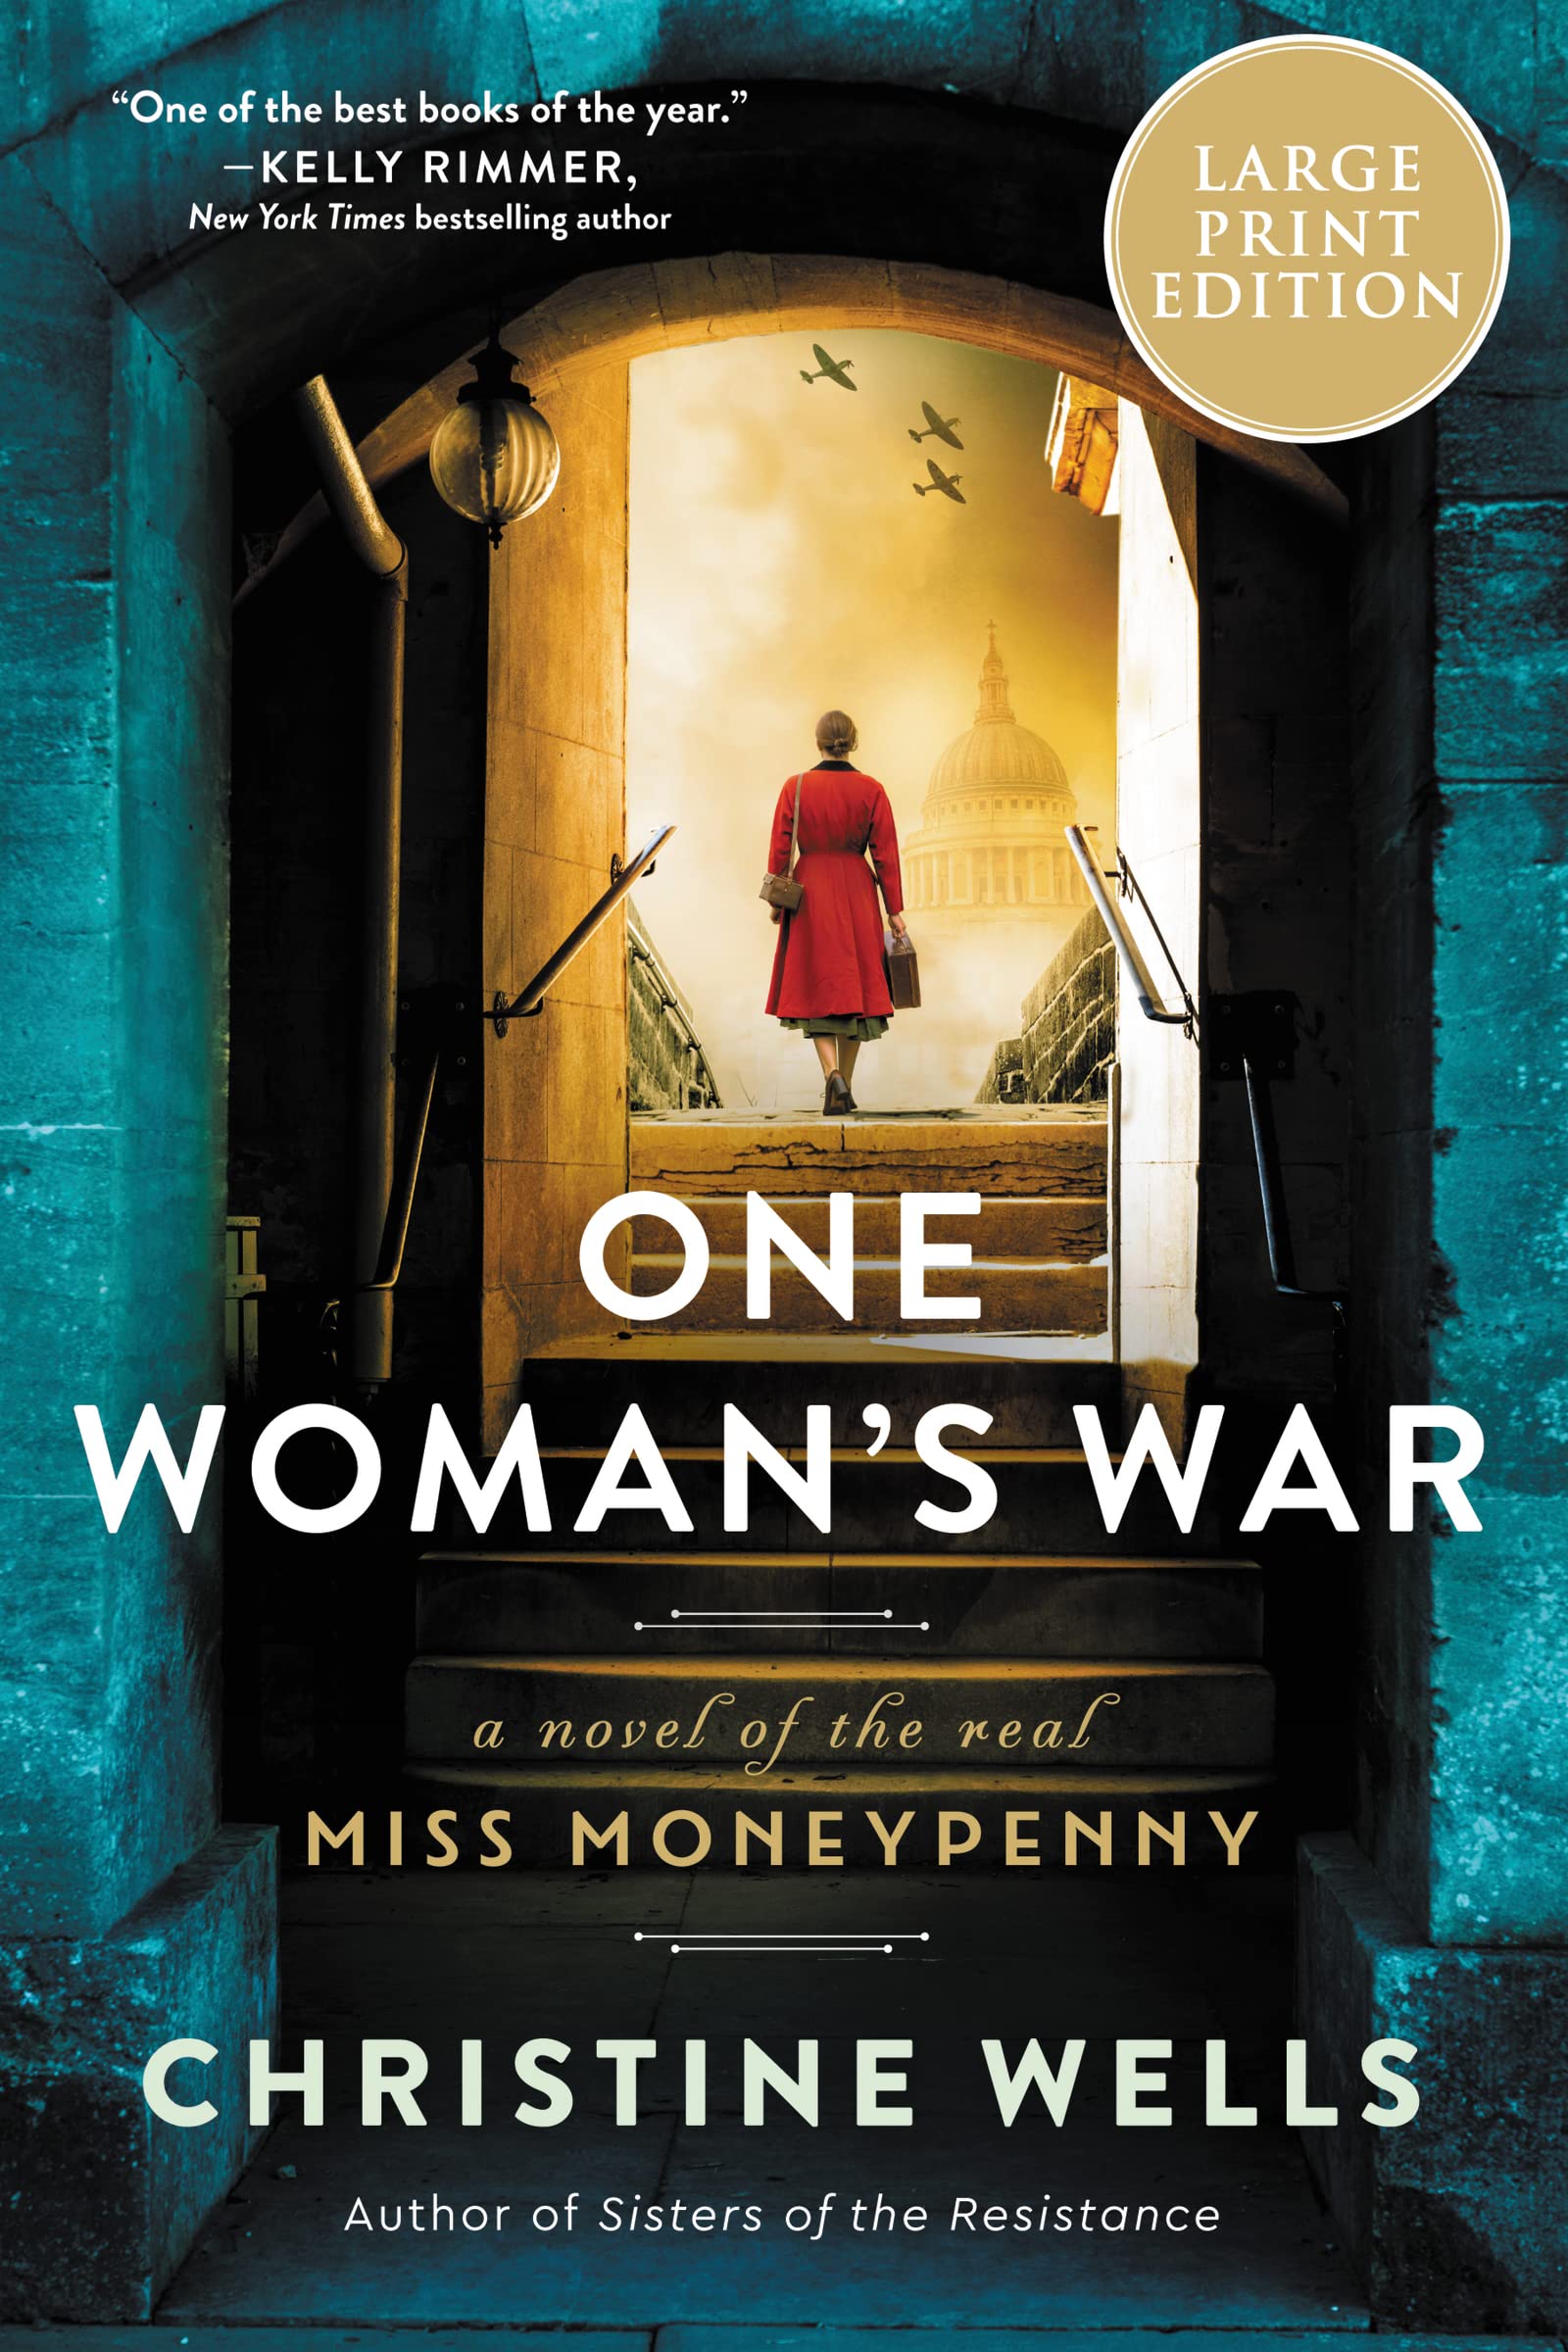 Image for "One Woman's War"